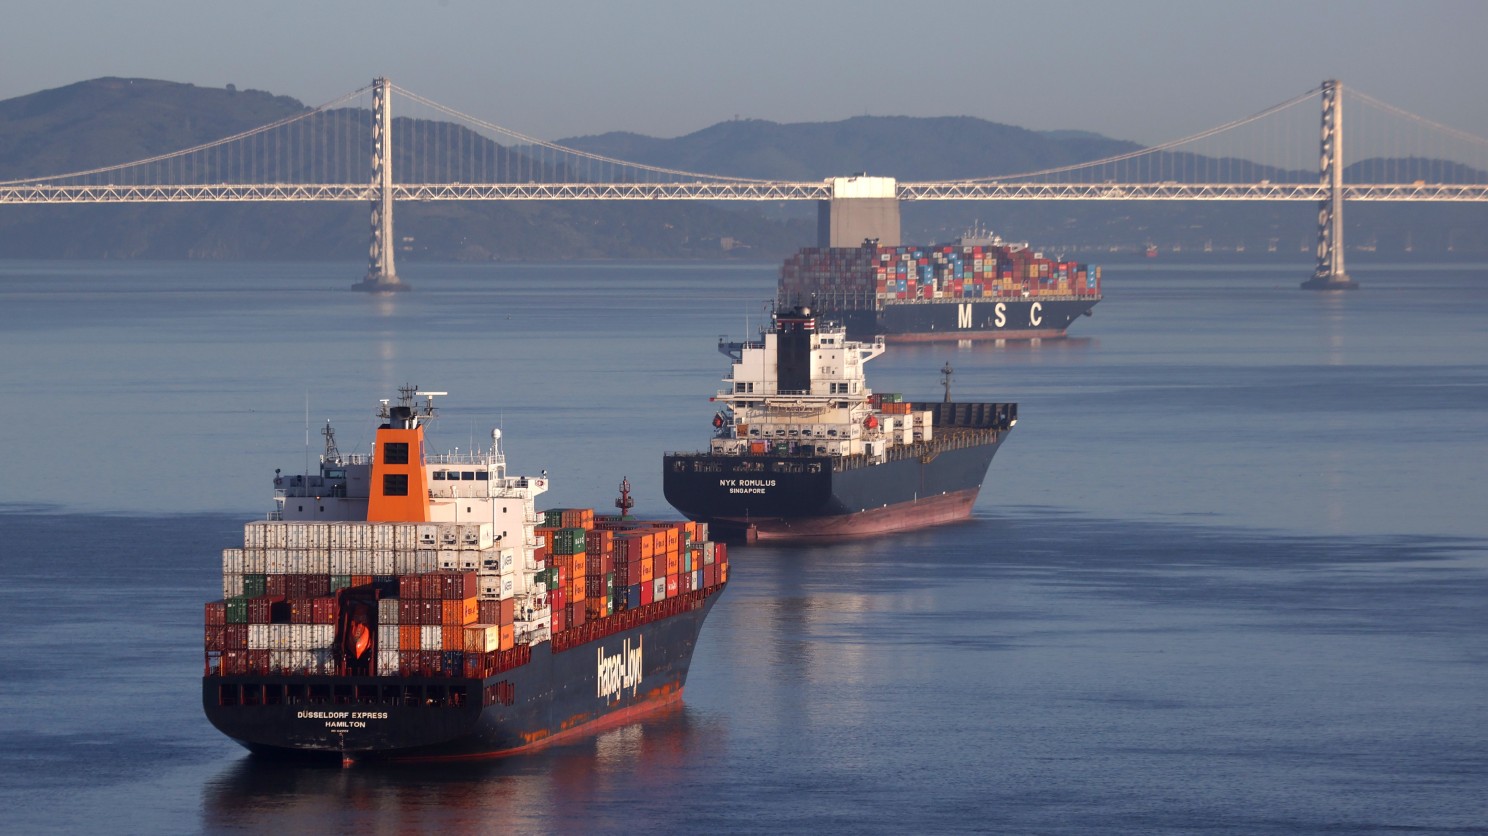 Cargo Ships. Supply Chains. Credit: Getty Images Copyright: 2021 Getty Images